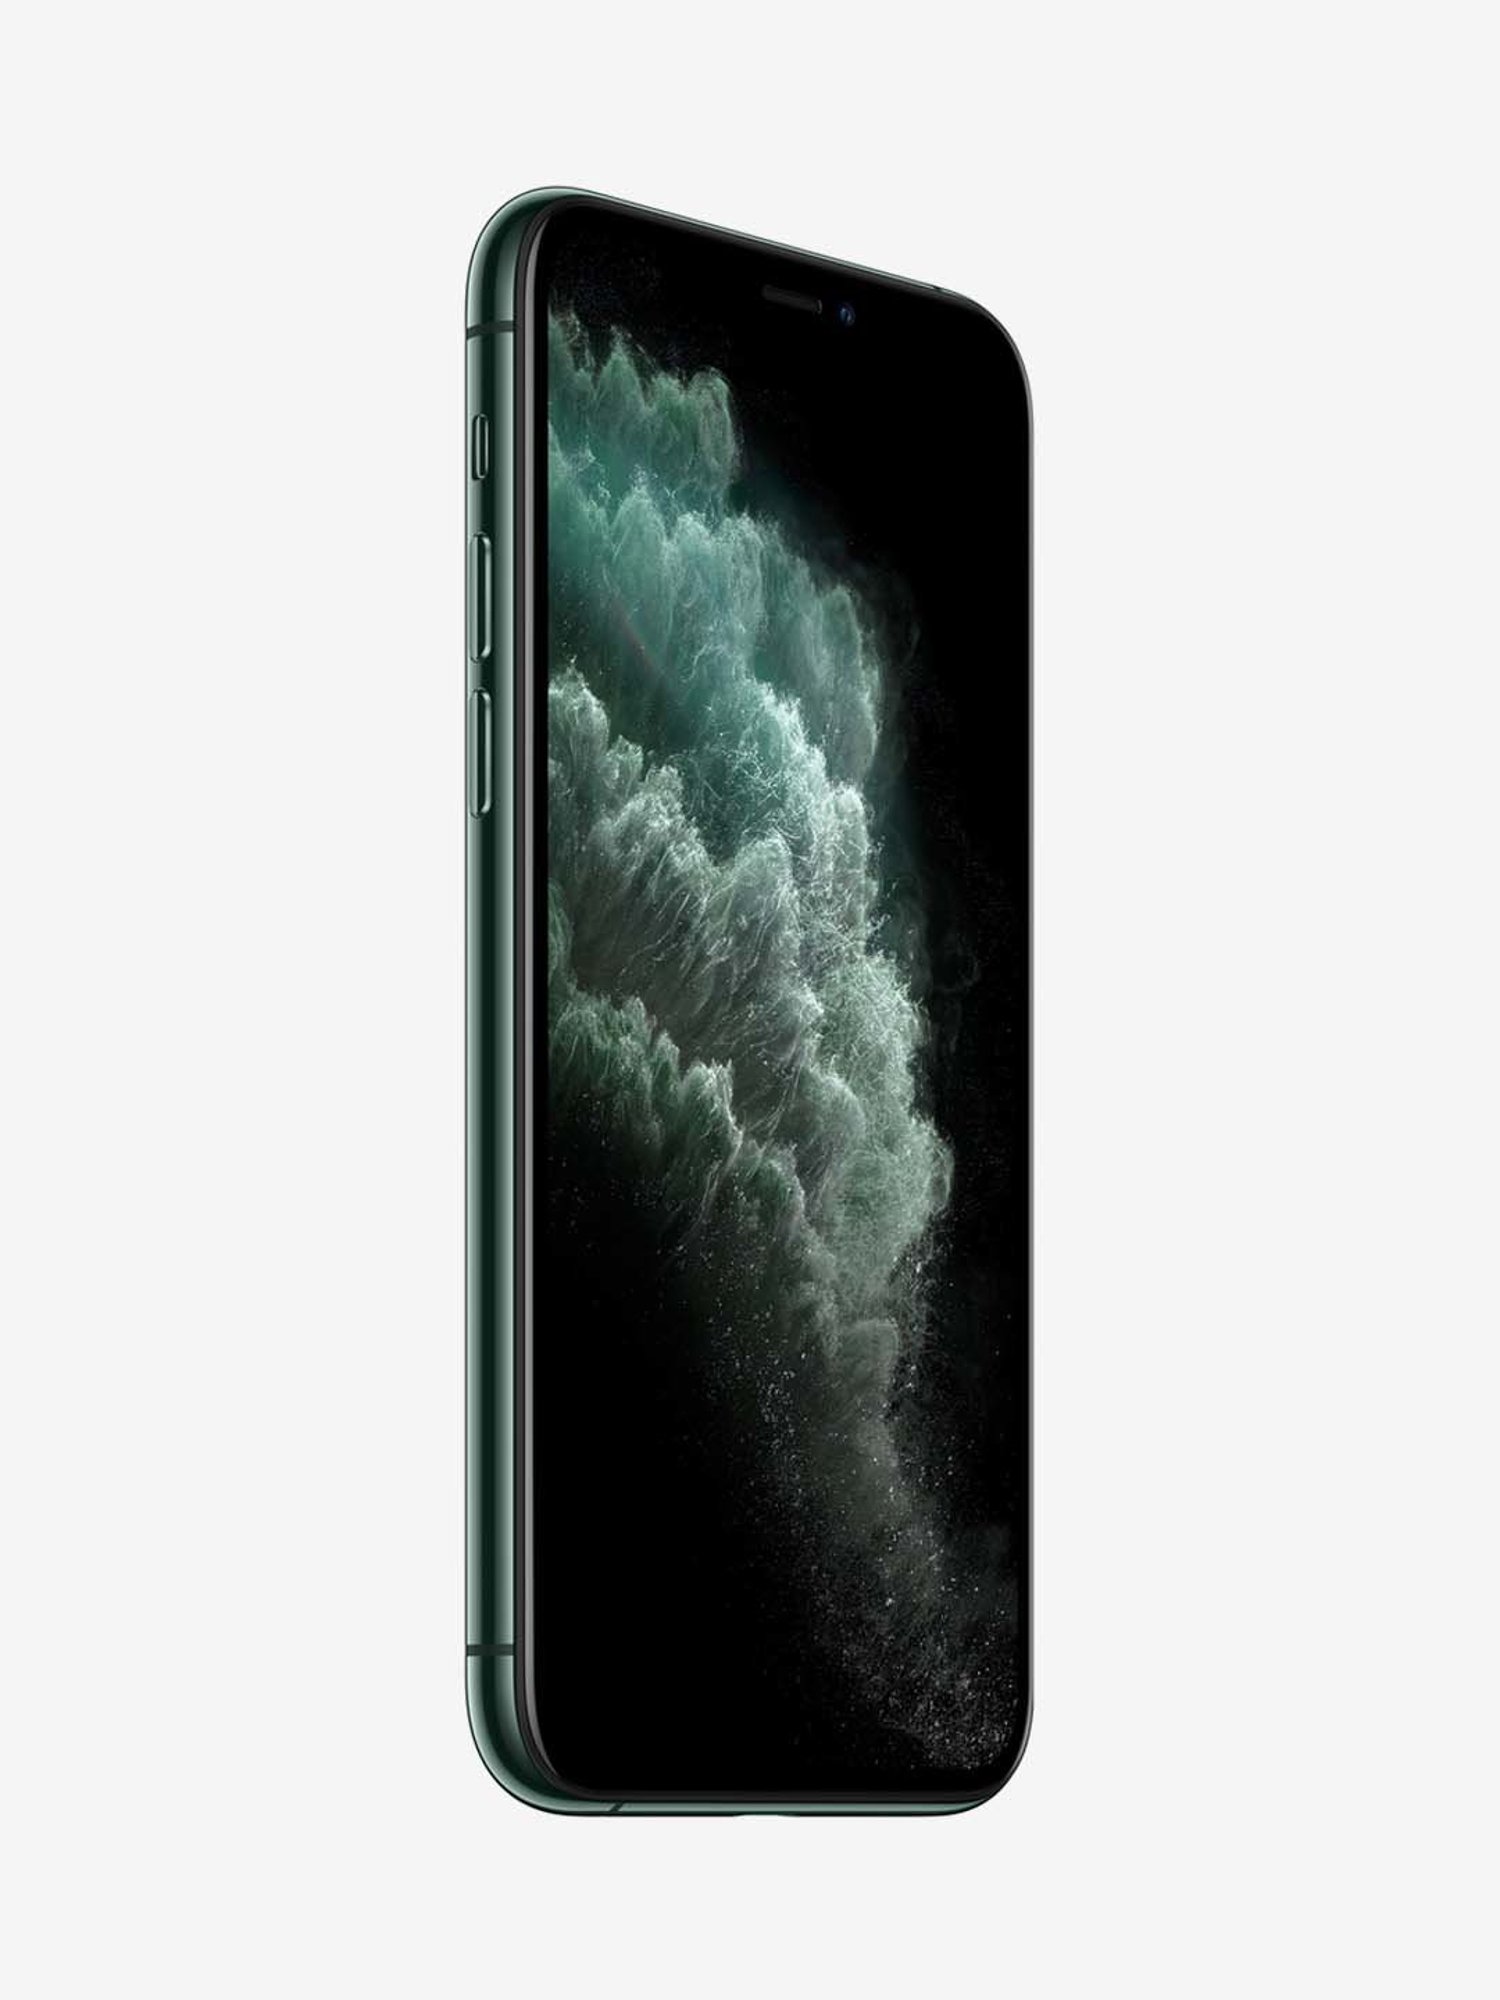 Buy Apple Iphone 11 Pro 64gb Midnight Green Includes Earpods Power Adapter Online At Best Prices Tata Cliq